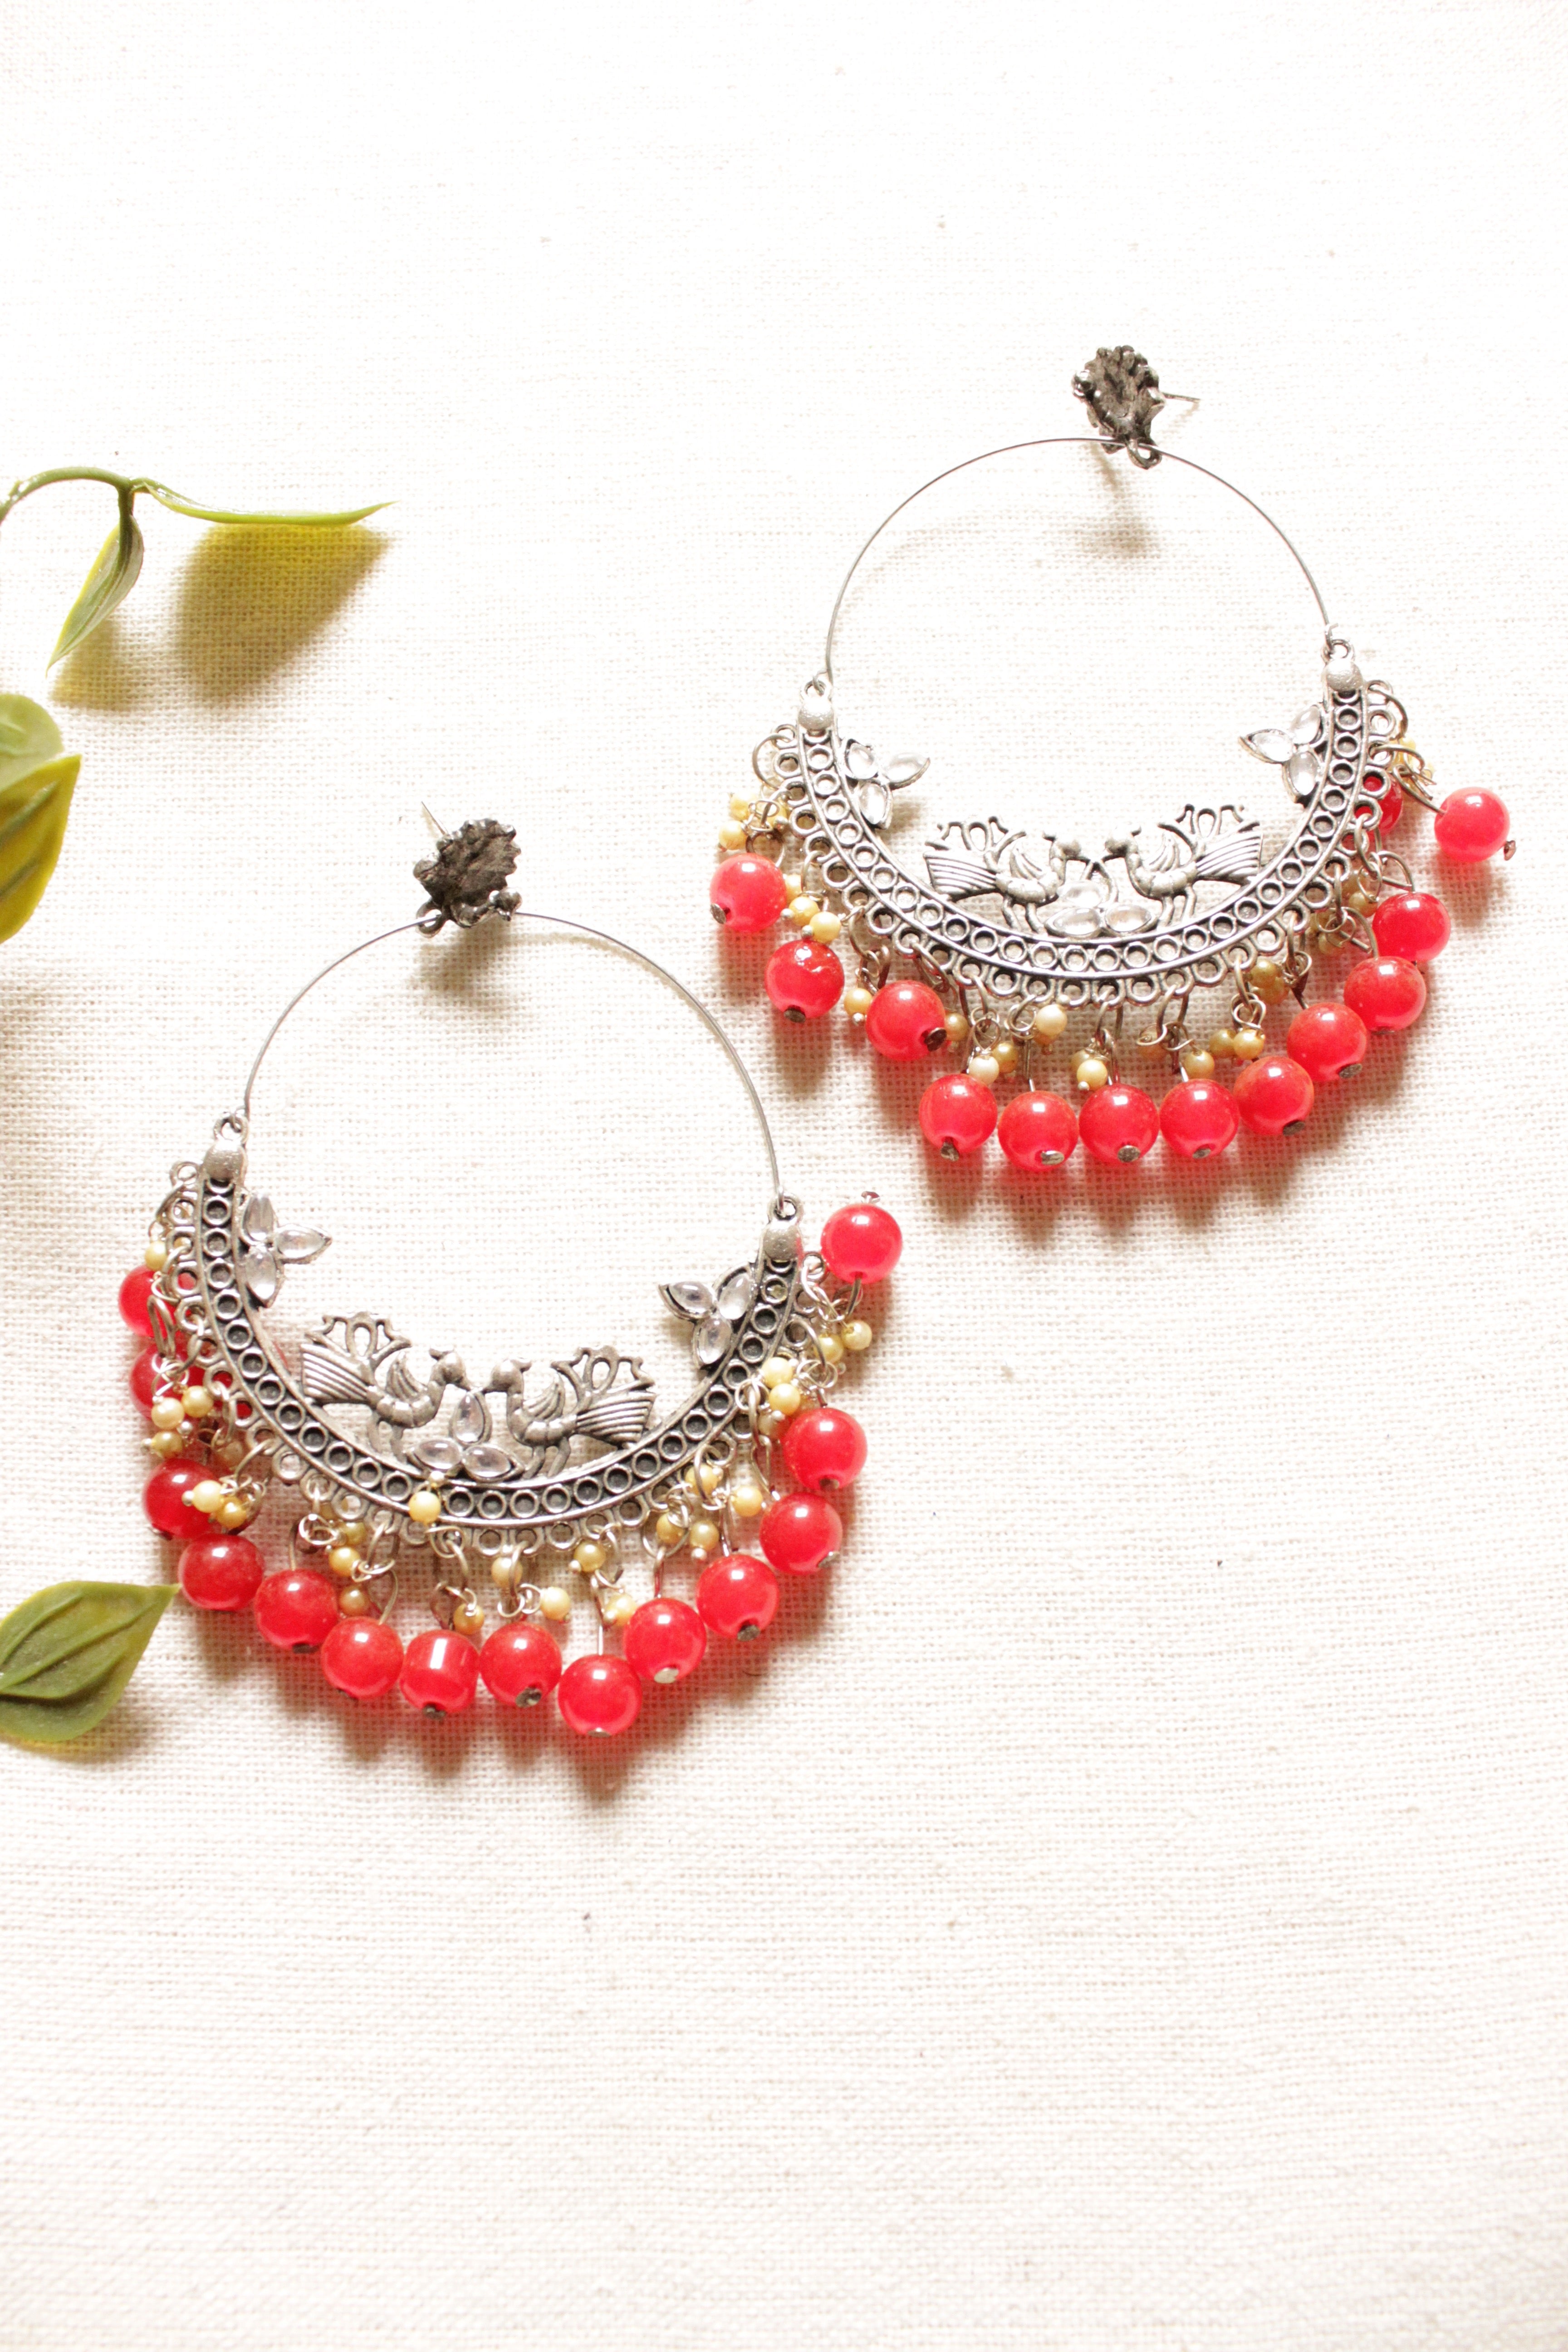 Peacock Motif Oxidised Finish Chandbali Earrings with Red Beads